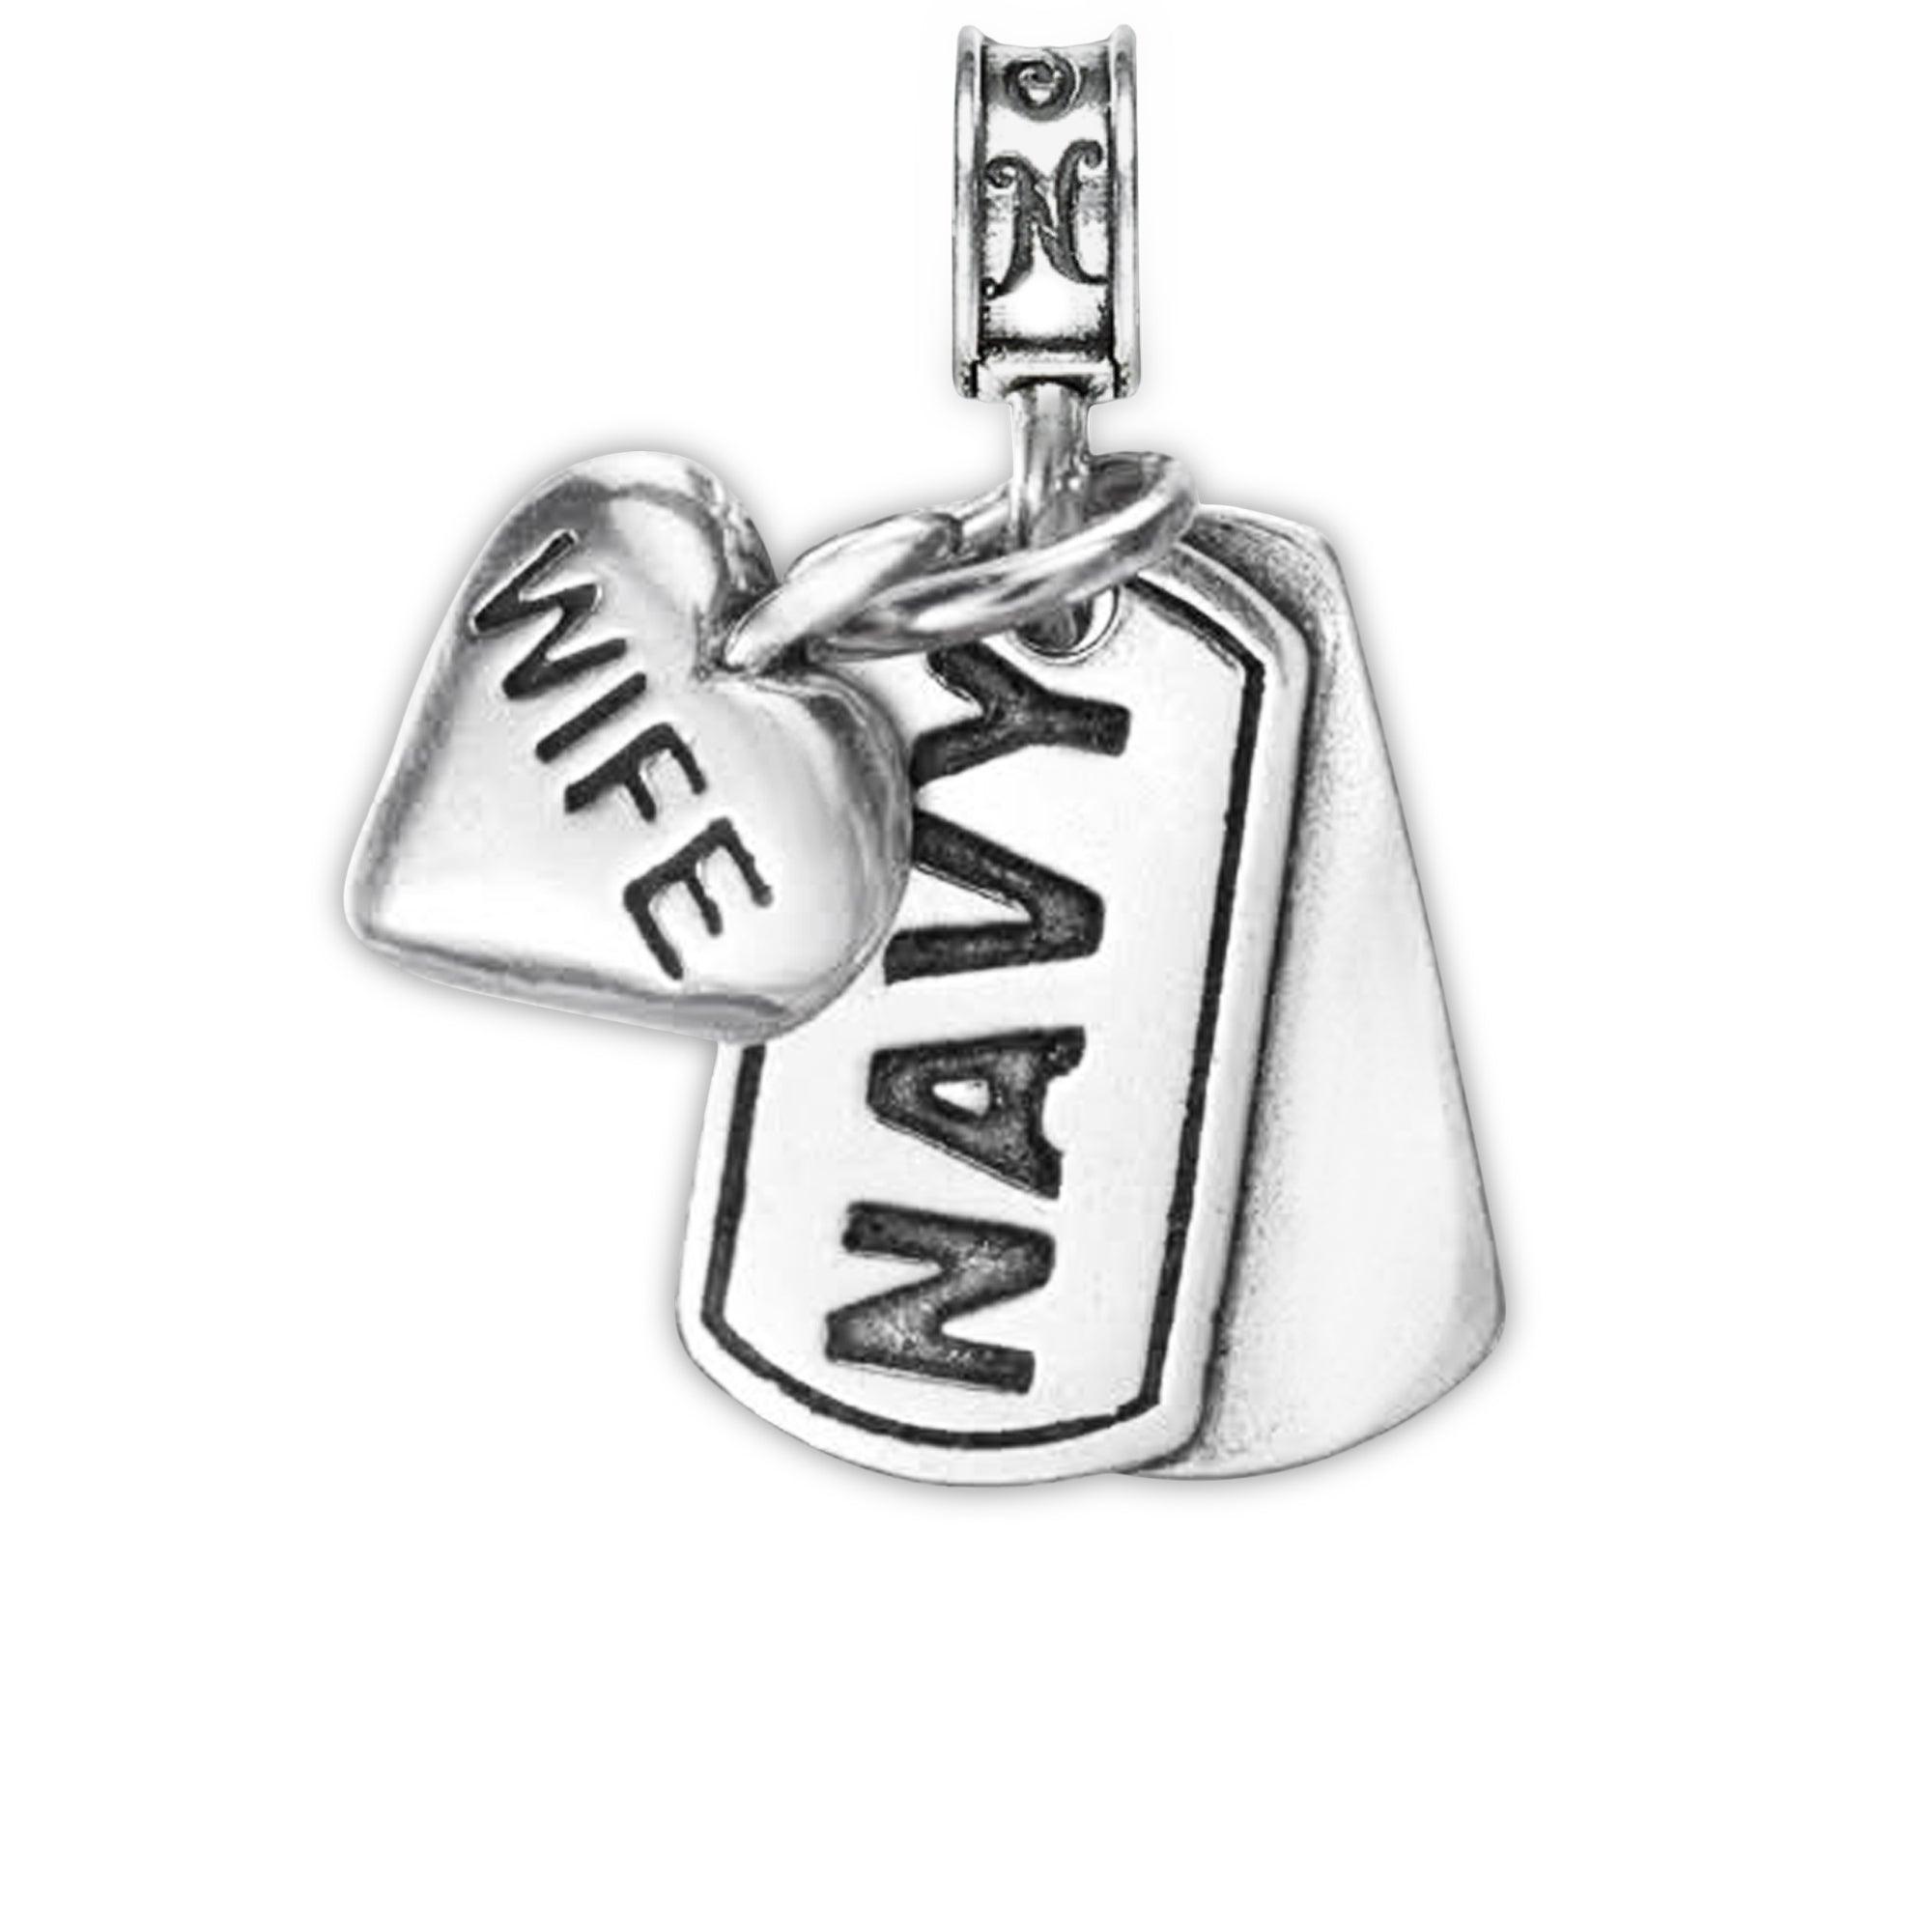 Military Jewelry, Military Charms, Navy, USN, Military Gifts, Navy Dog Tag, Navy Wife